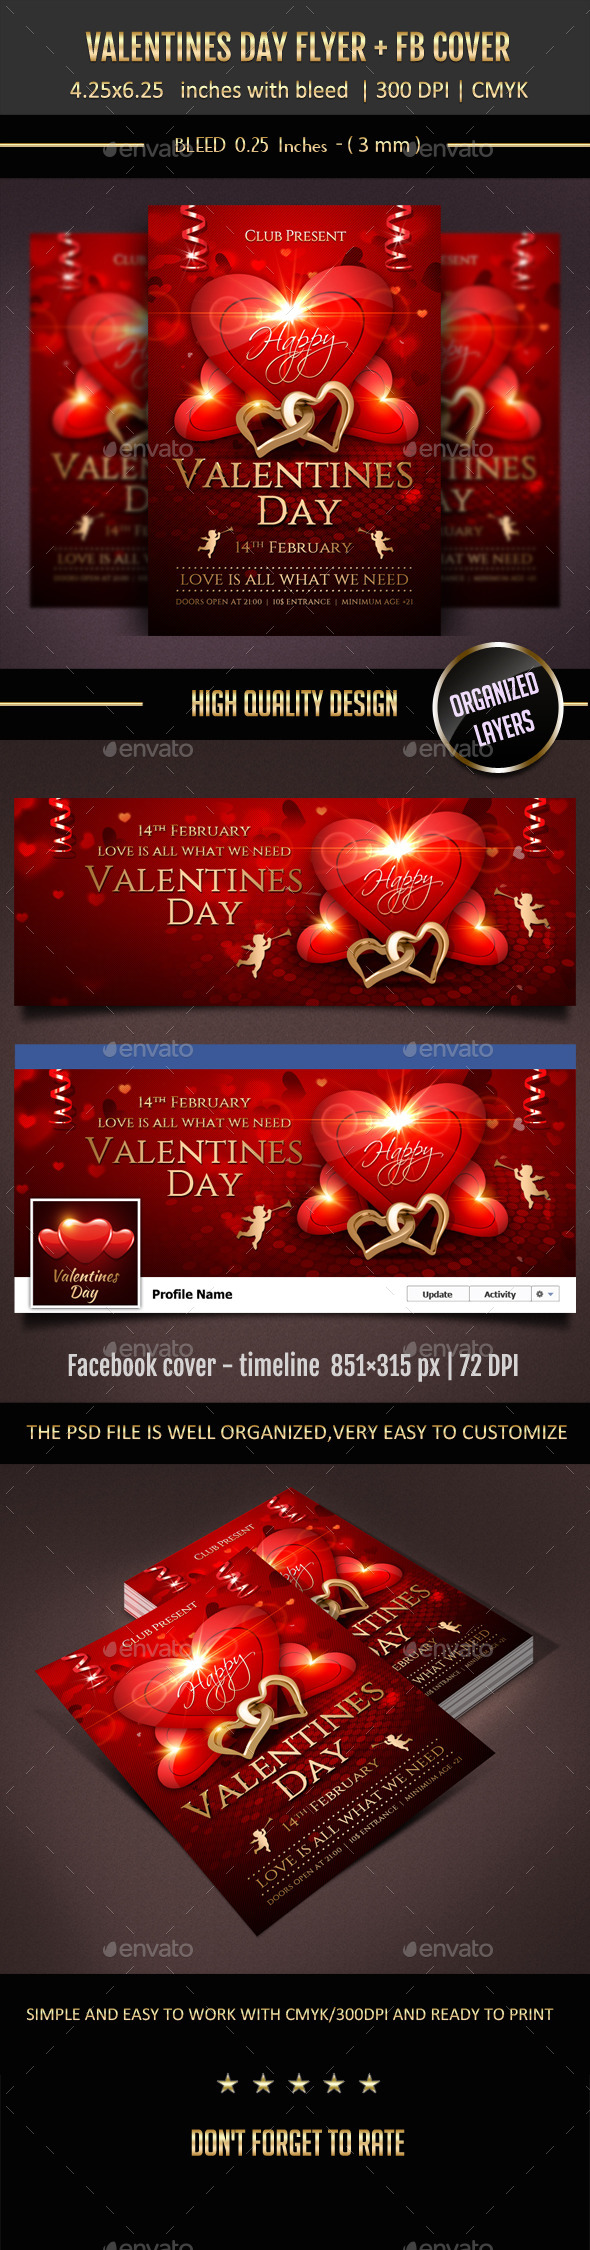 Valentines Day Flyer + Facebook Cover!